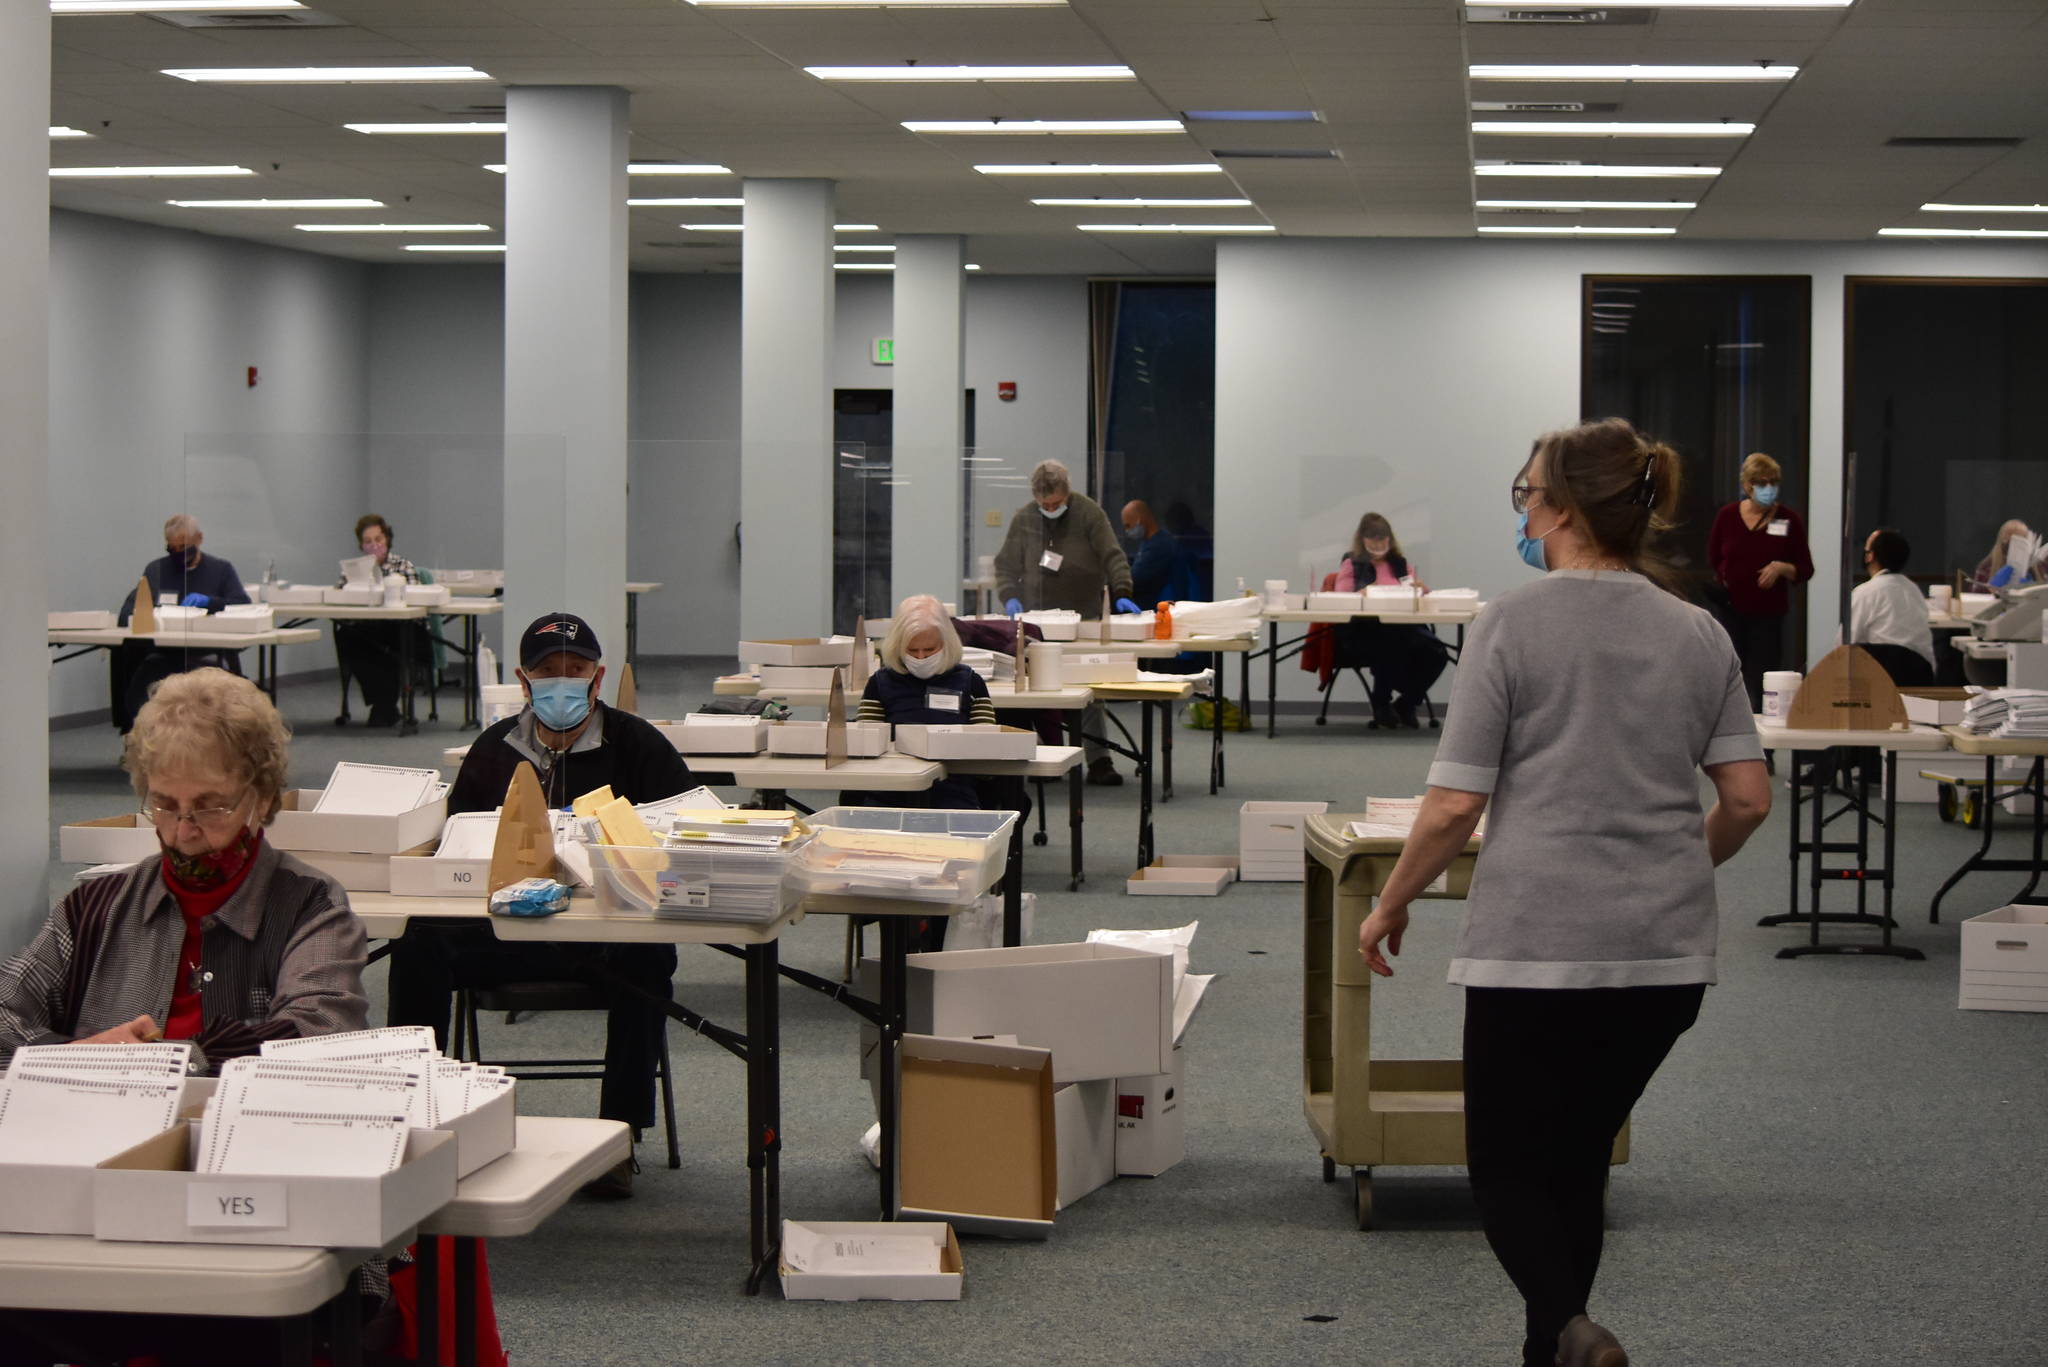 Division of Elections staff conducted an audit of the ballots for Measure 2 at the division’s offices at the Mendenhall Mall on Monday, Dec. 7, 2020. DOE announced the audit found no changes from the original count and the results remained the same as originally certified. (Peter Segall / Juneau Empire)